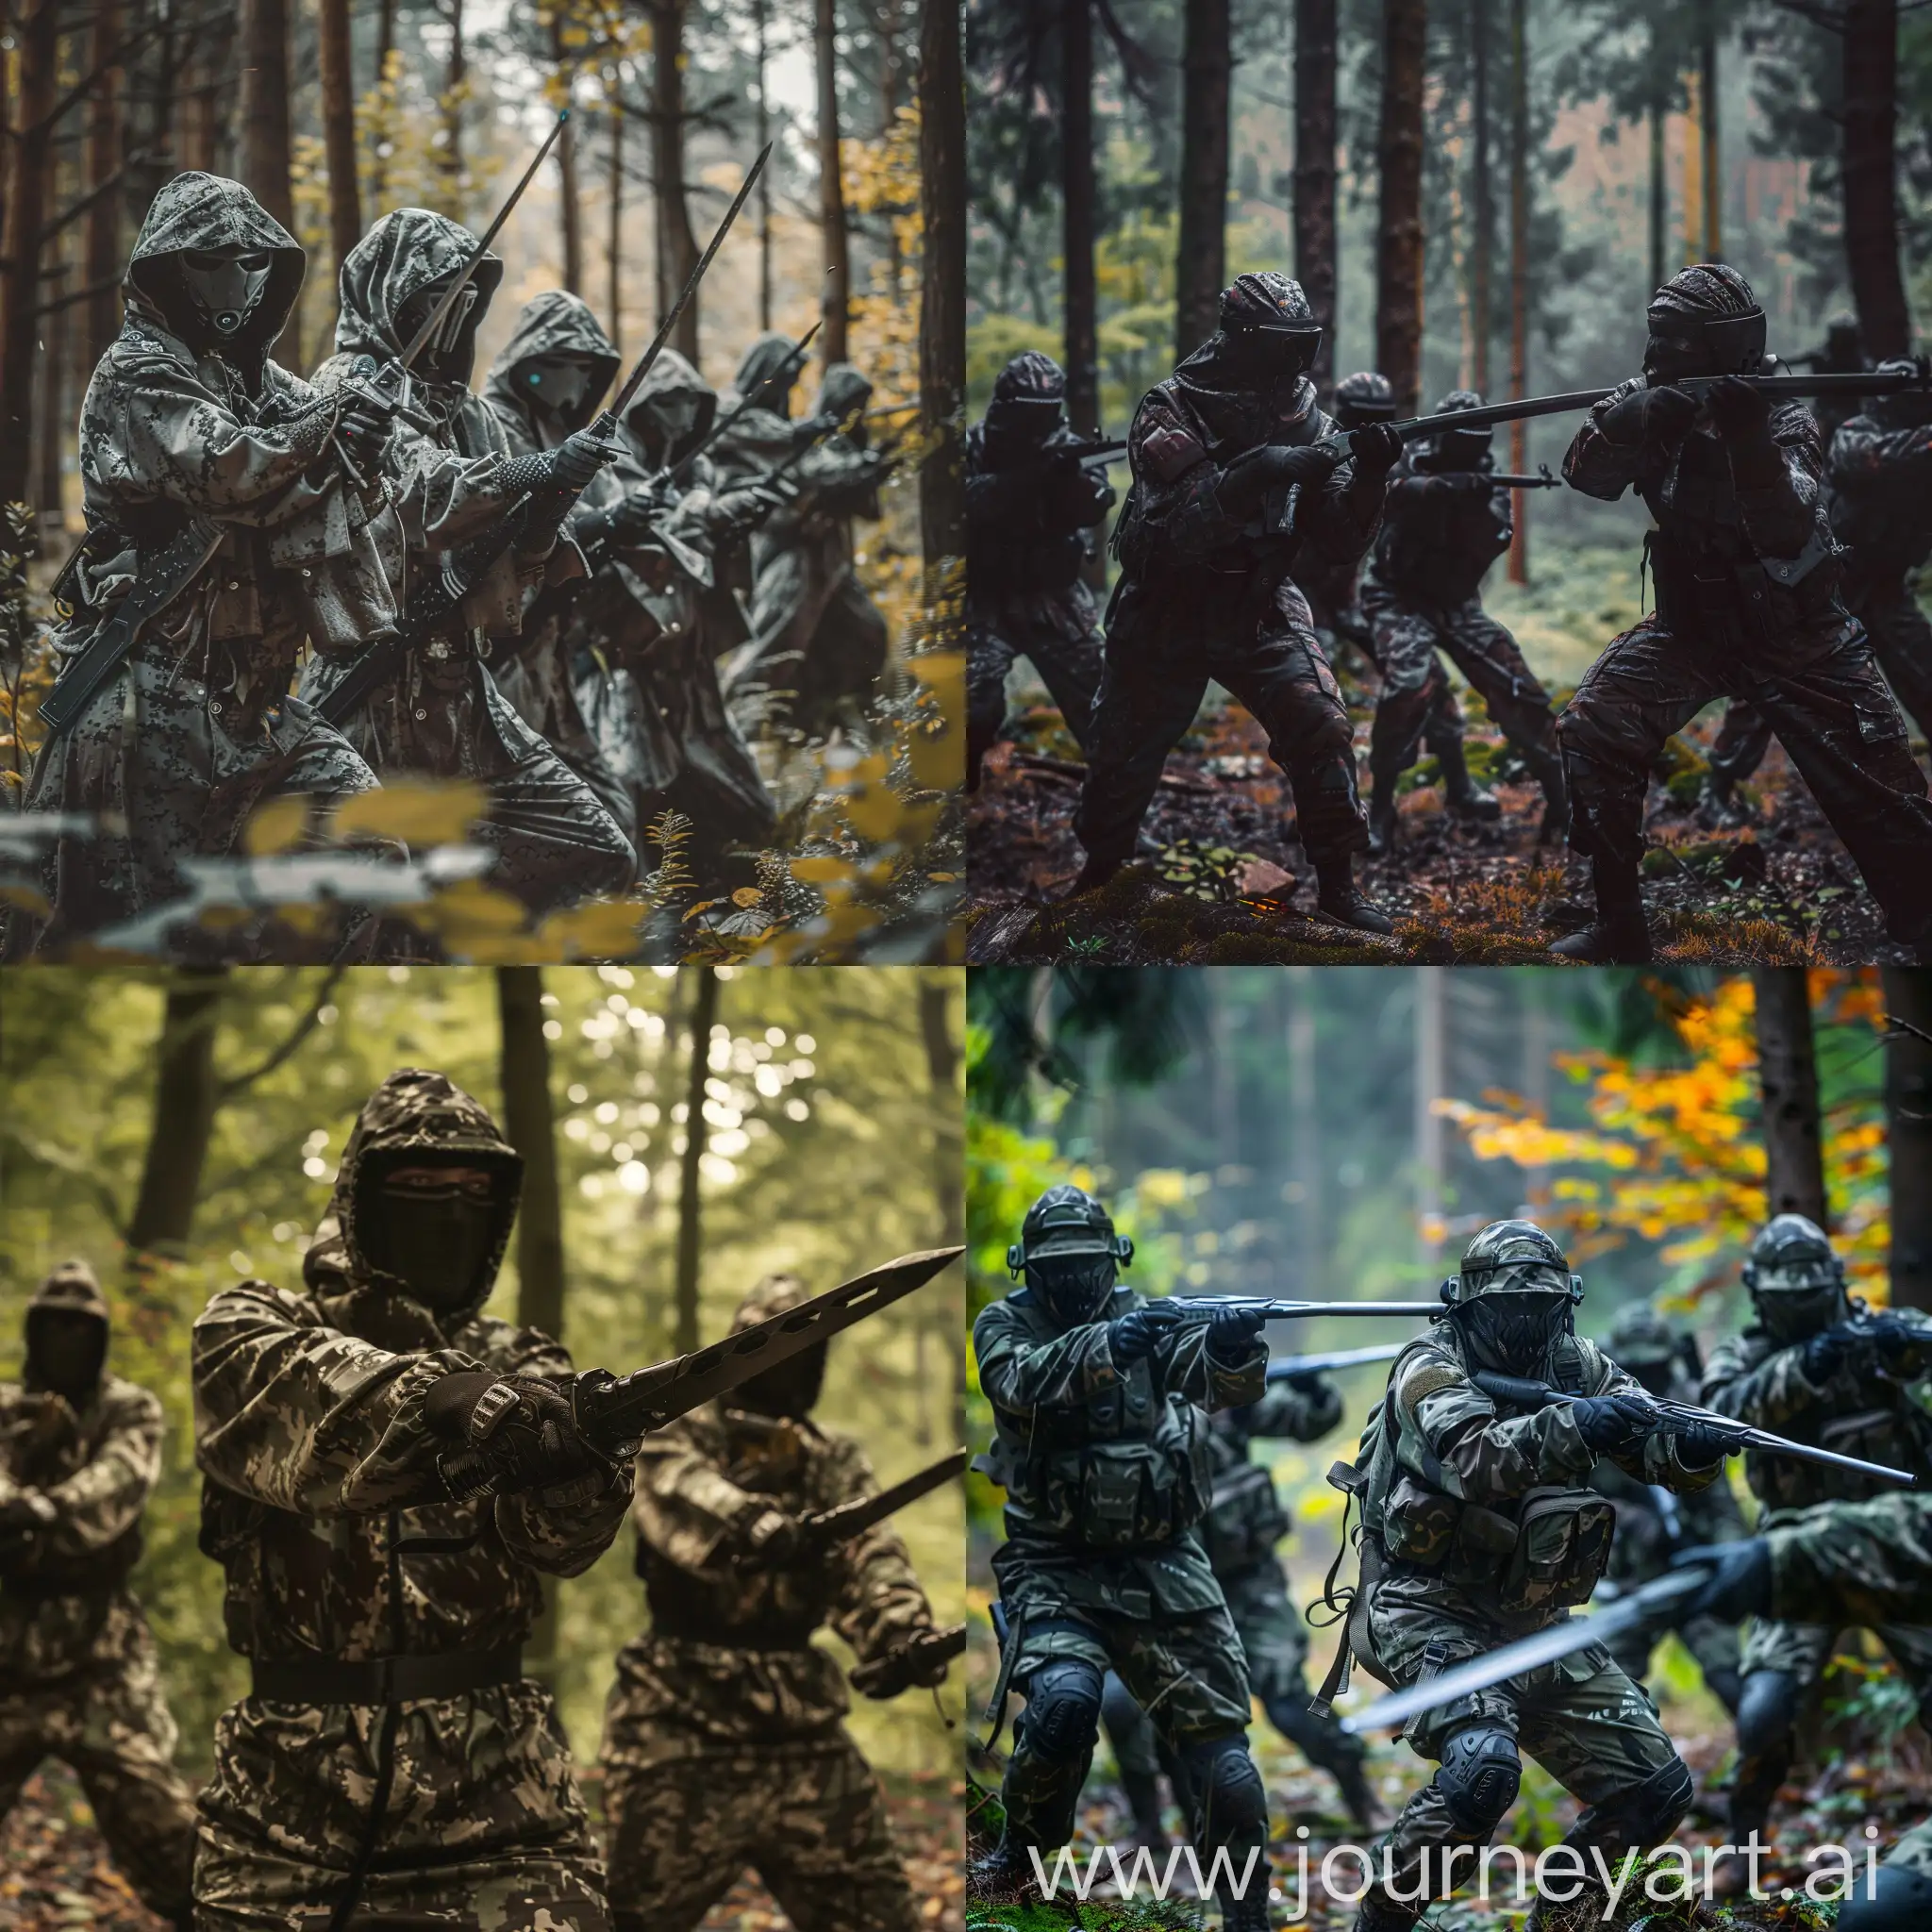 Futuristic-KatanaWielding-Soldiers-Eager-for-Battle-in-Camouflaged-Forest